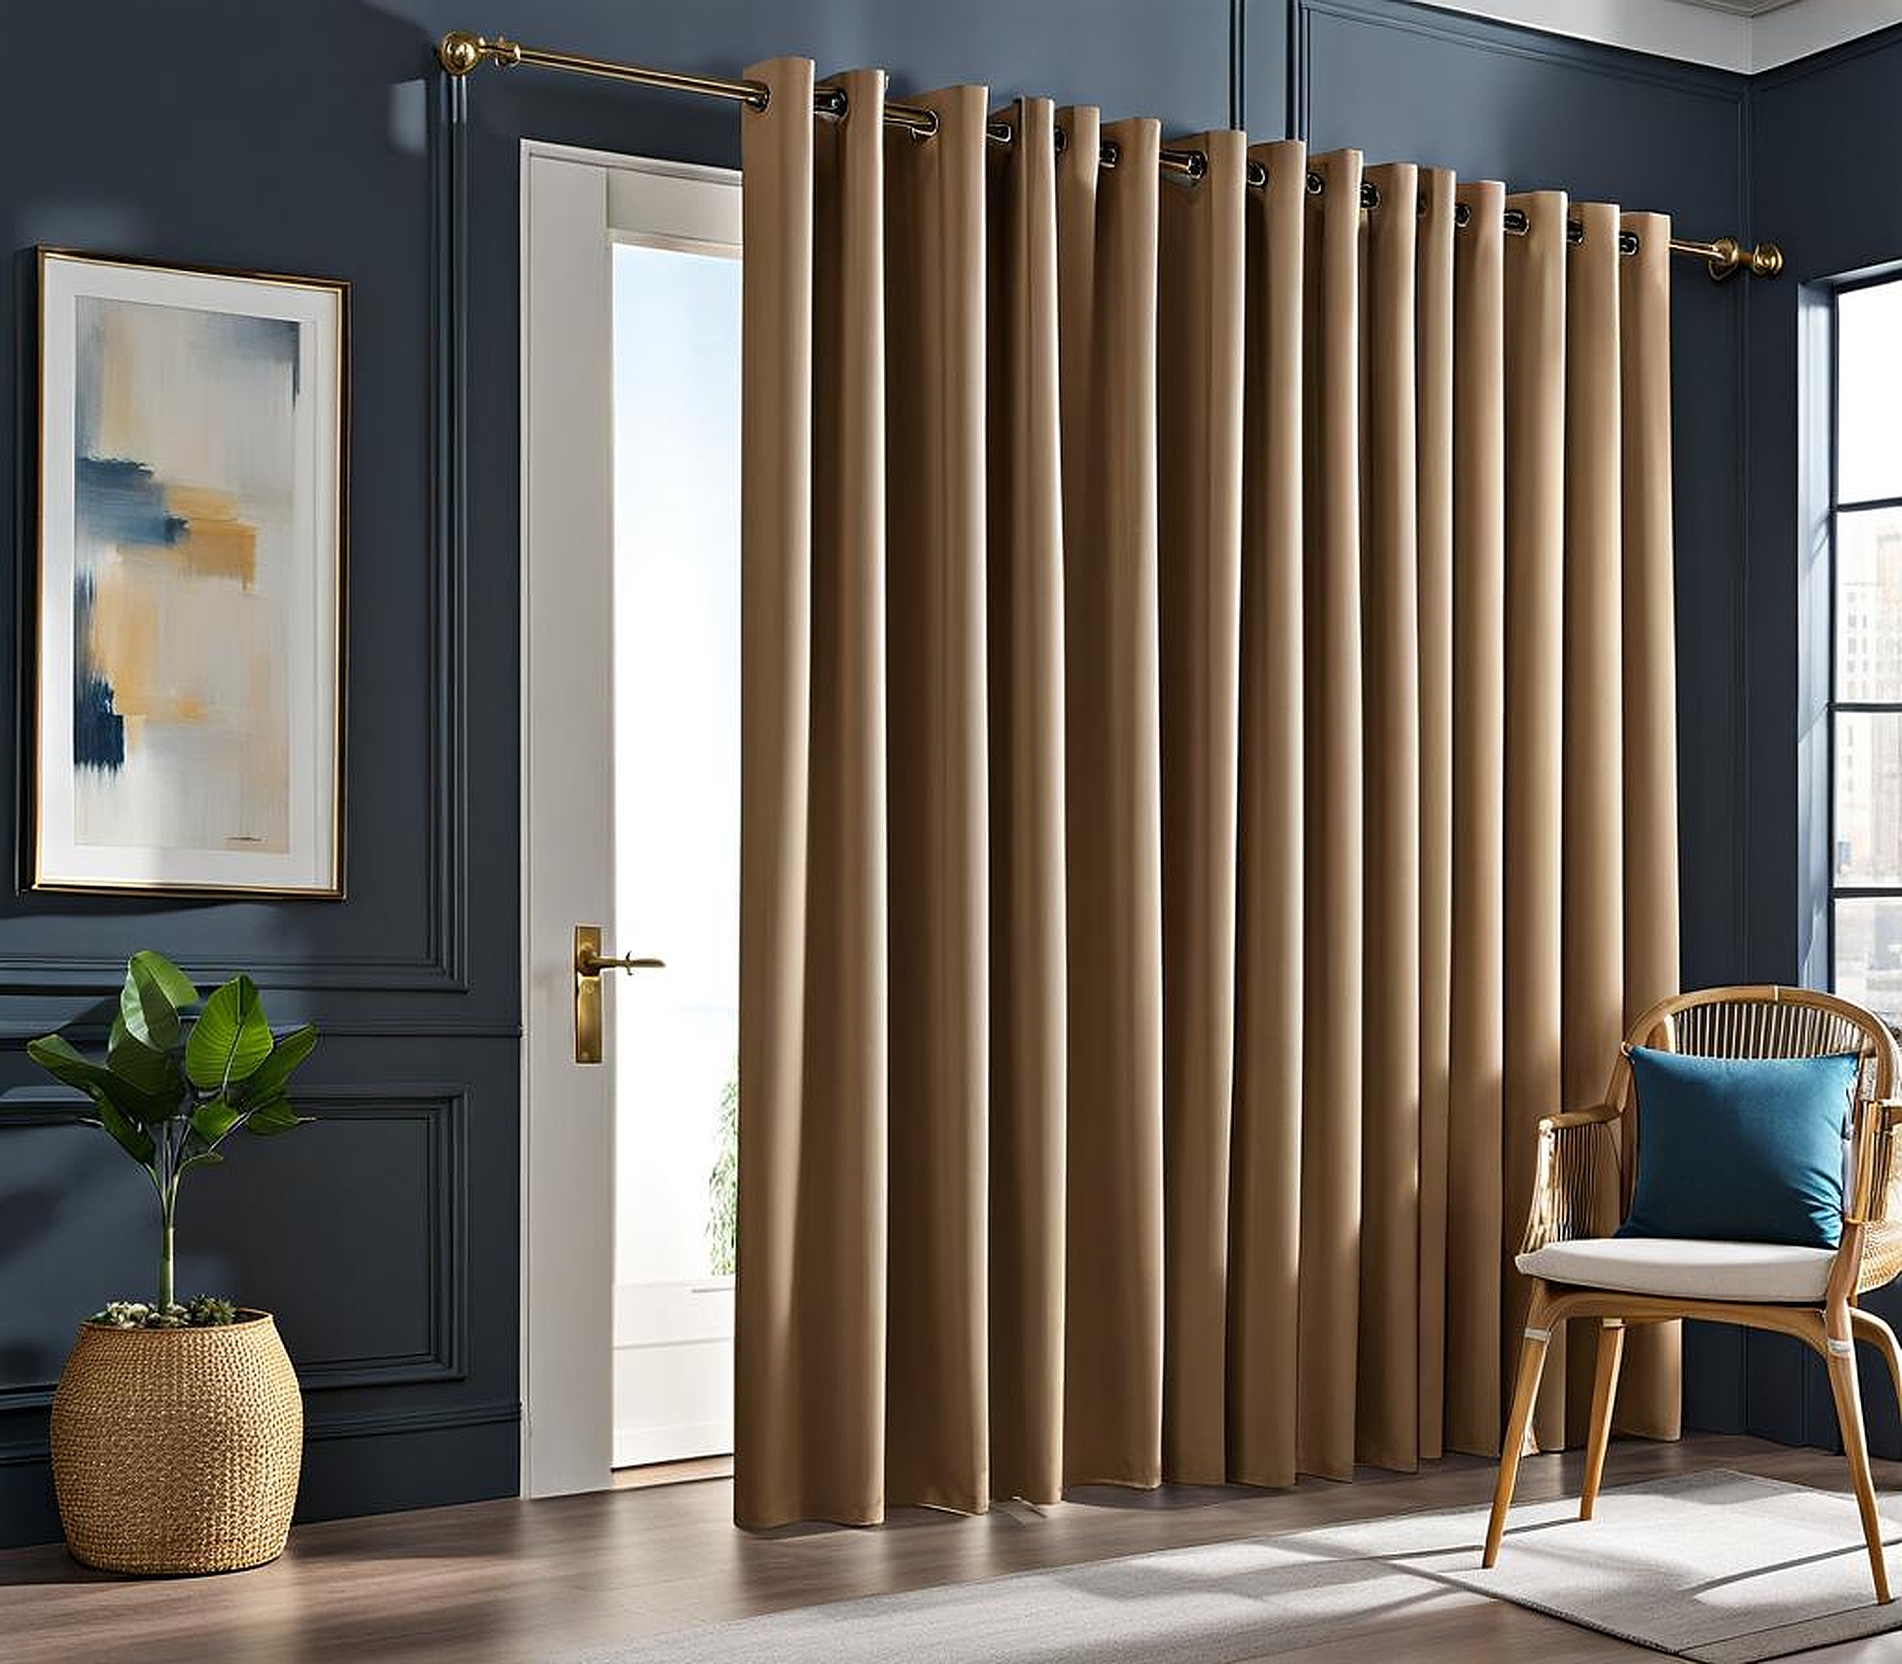 privacy curtain for doorway